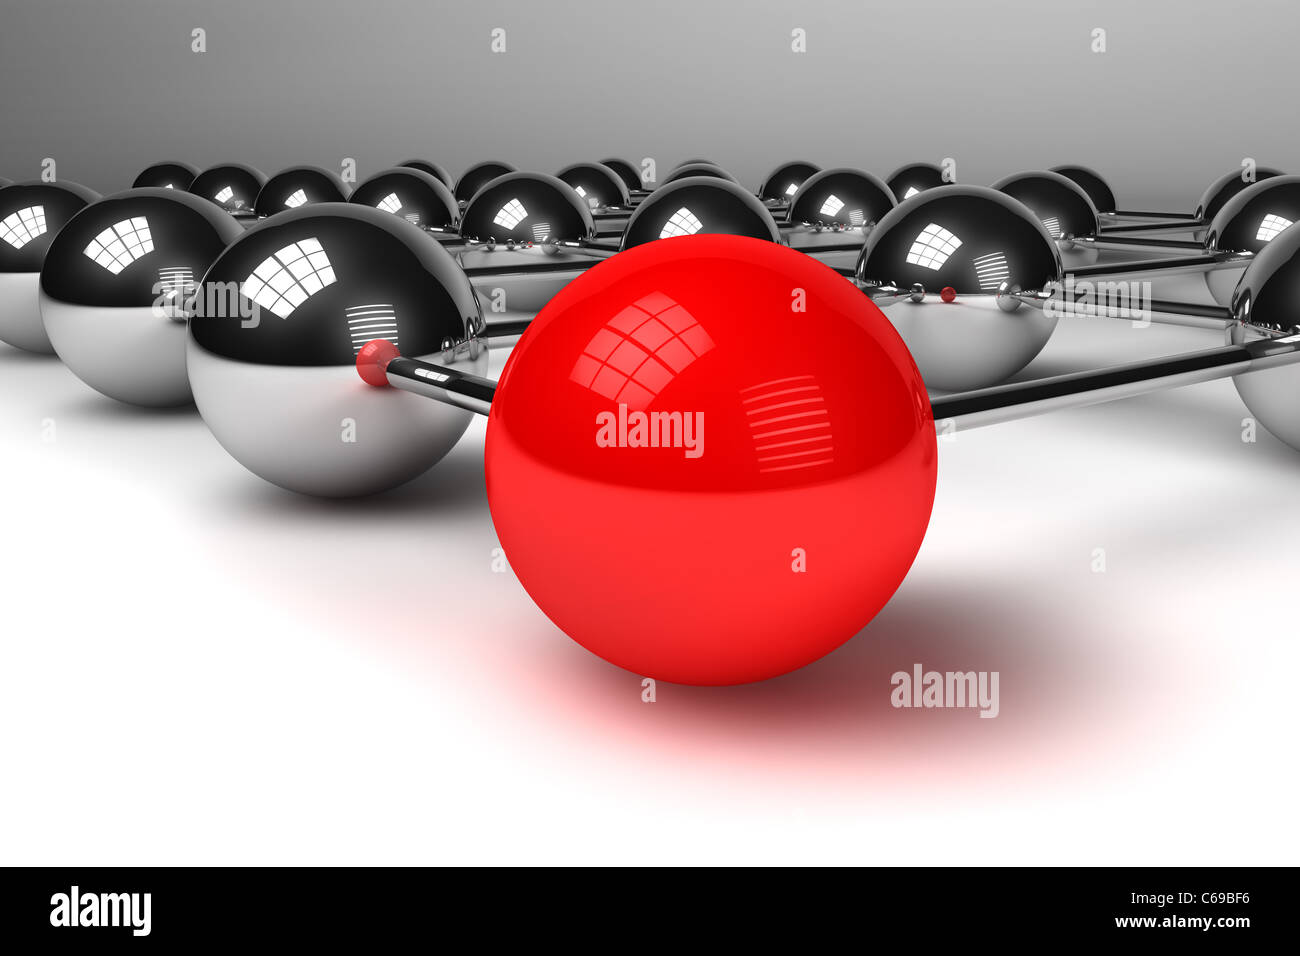 Concept of network/connection and communication with spheres Stock Photo